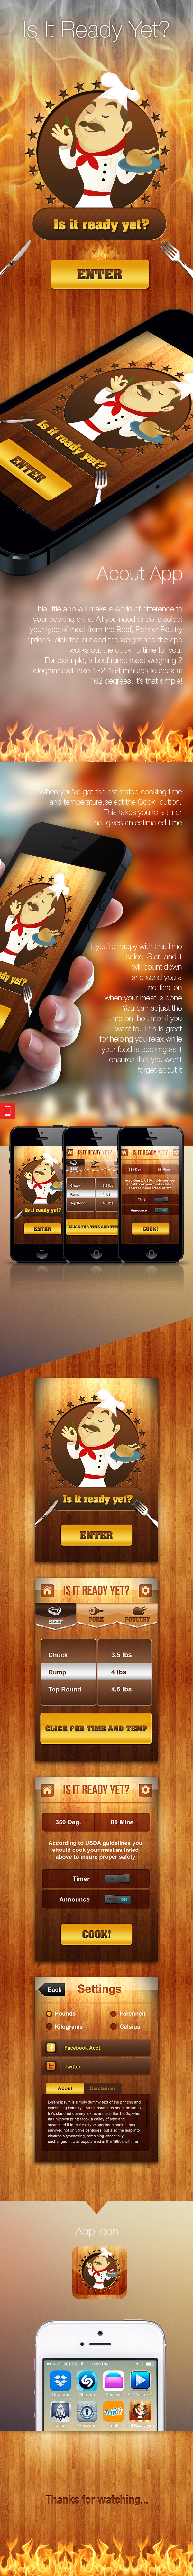 food & drink cooking app iphone app kitchen beef pork roasts whole poultry chicken Turkey duck cooking timer what's cooking